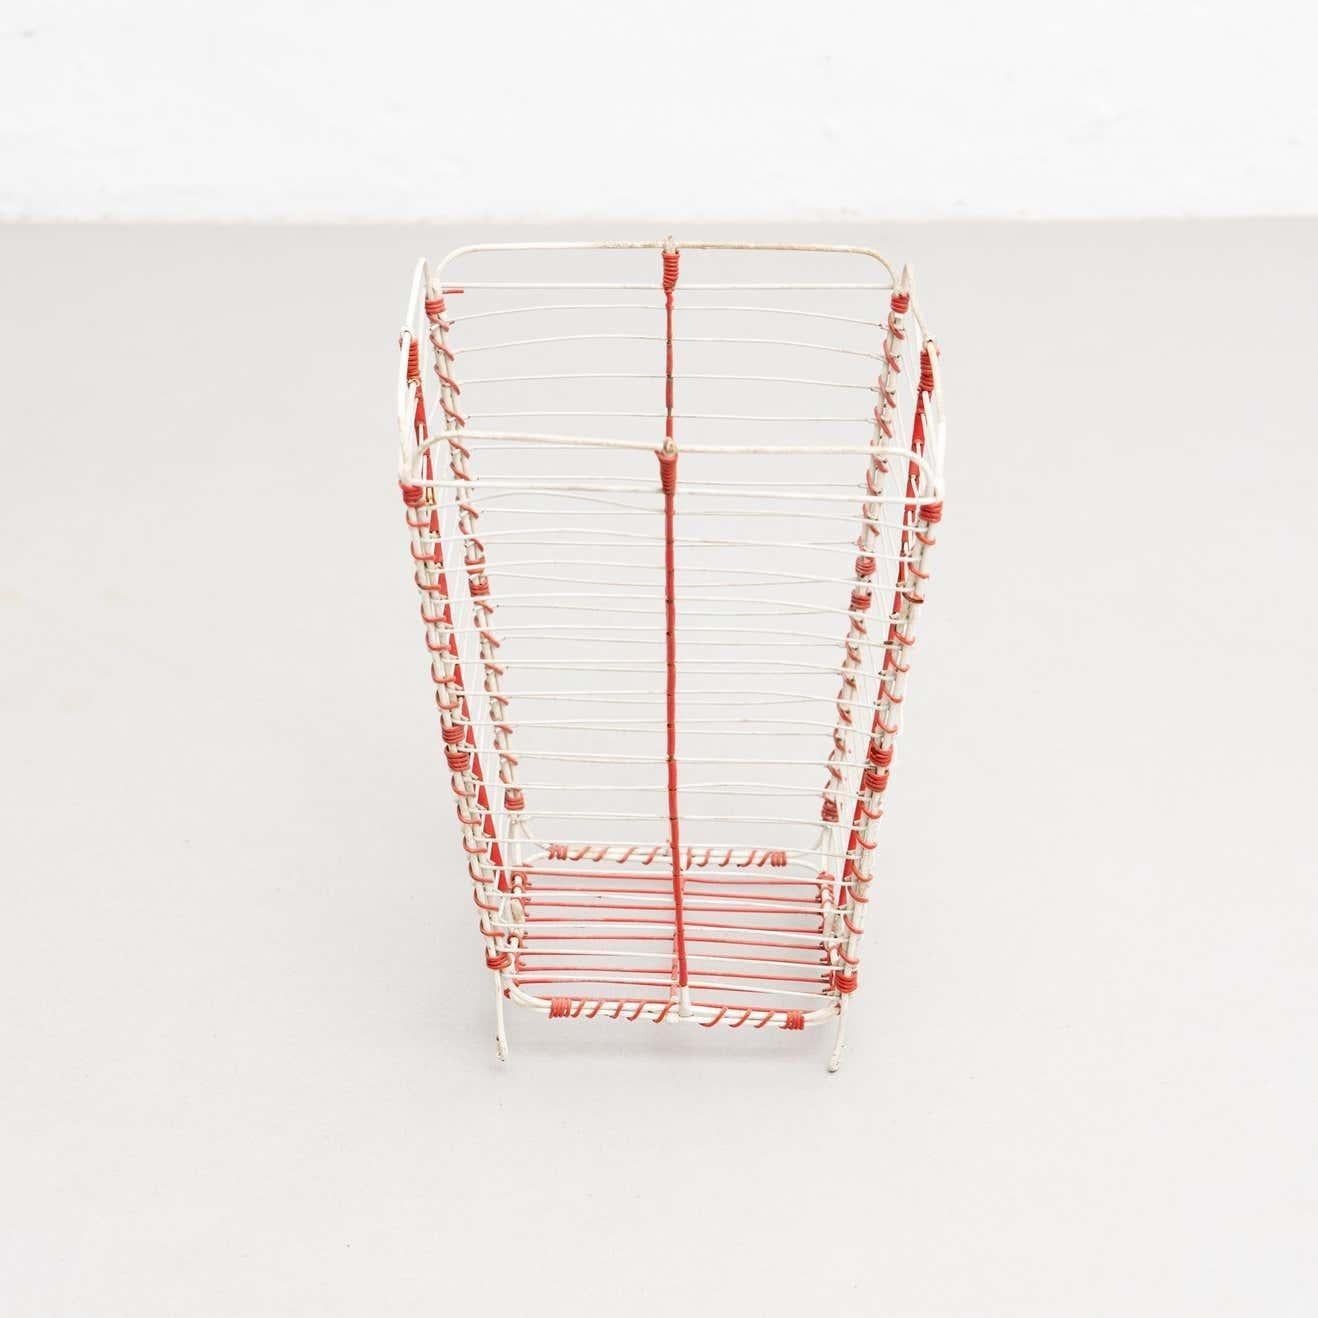 Metal paper bin made by wire woven in a classic cross-hatched pattern completed by a solid ring. 
Unknown manufacturer, France,
circa 1950

Materials:
Metal

In original condition, with minor wear consistent of age and use, preserving a beautiful